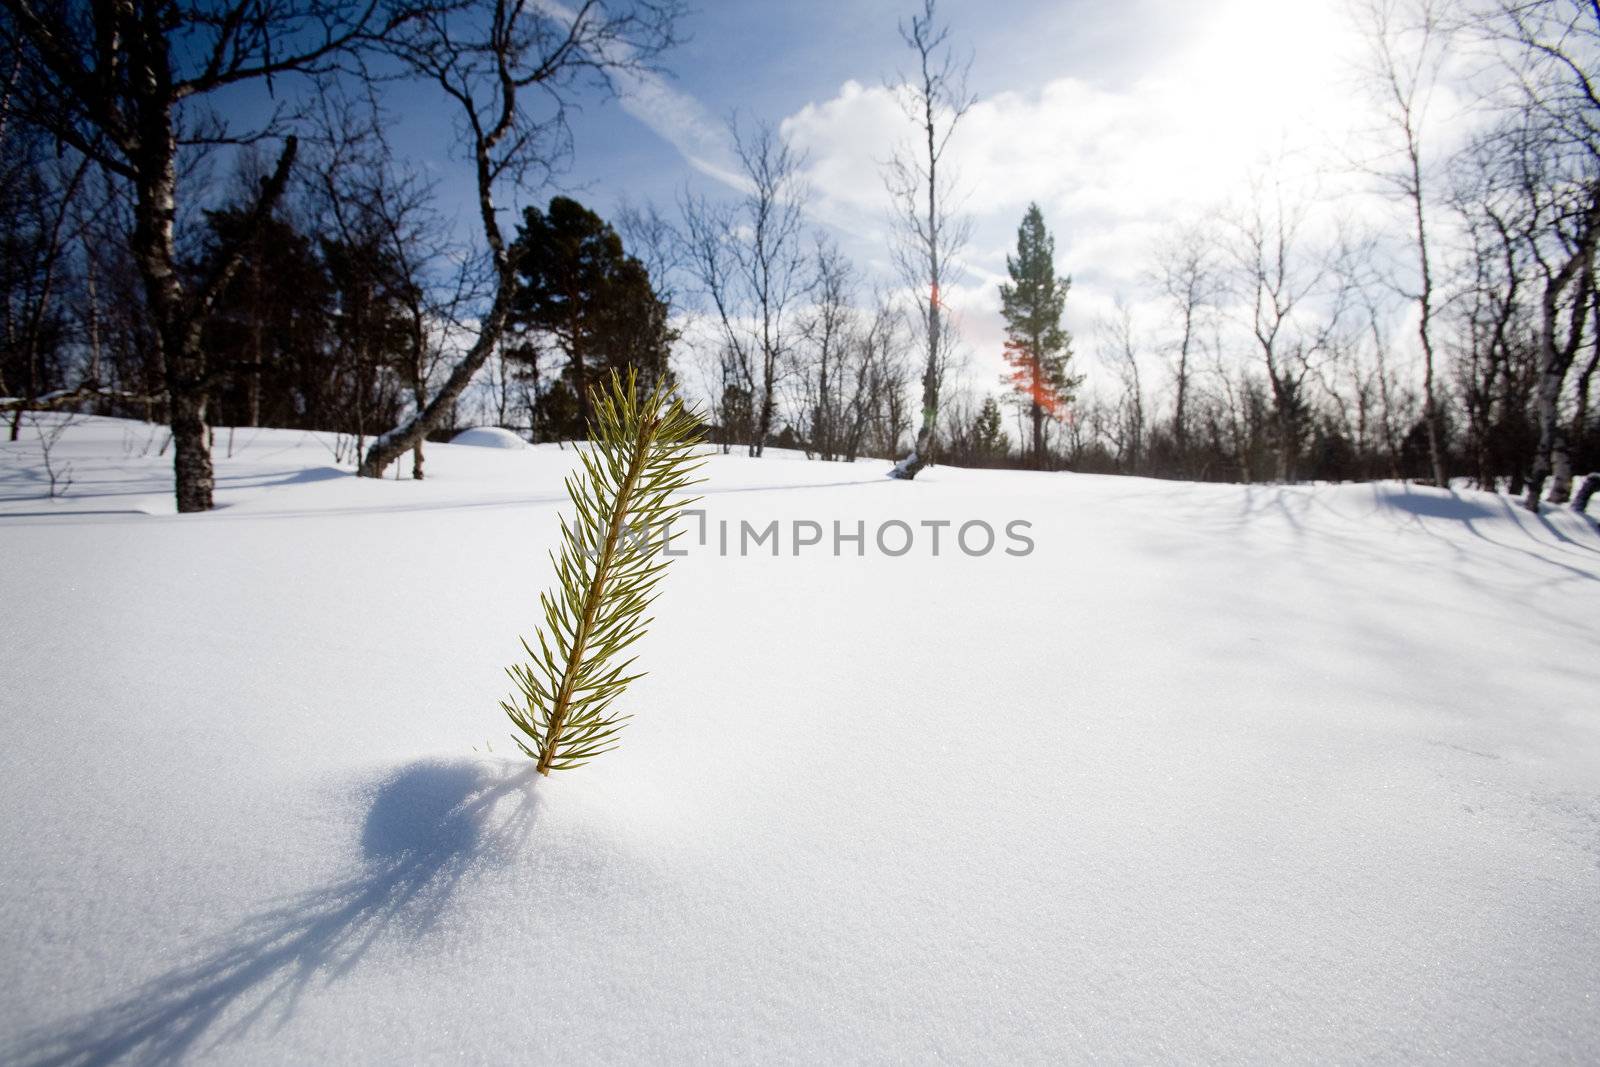 A small tree surviving in the snow